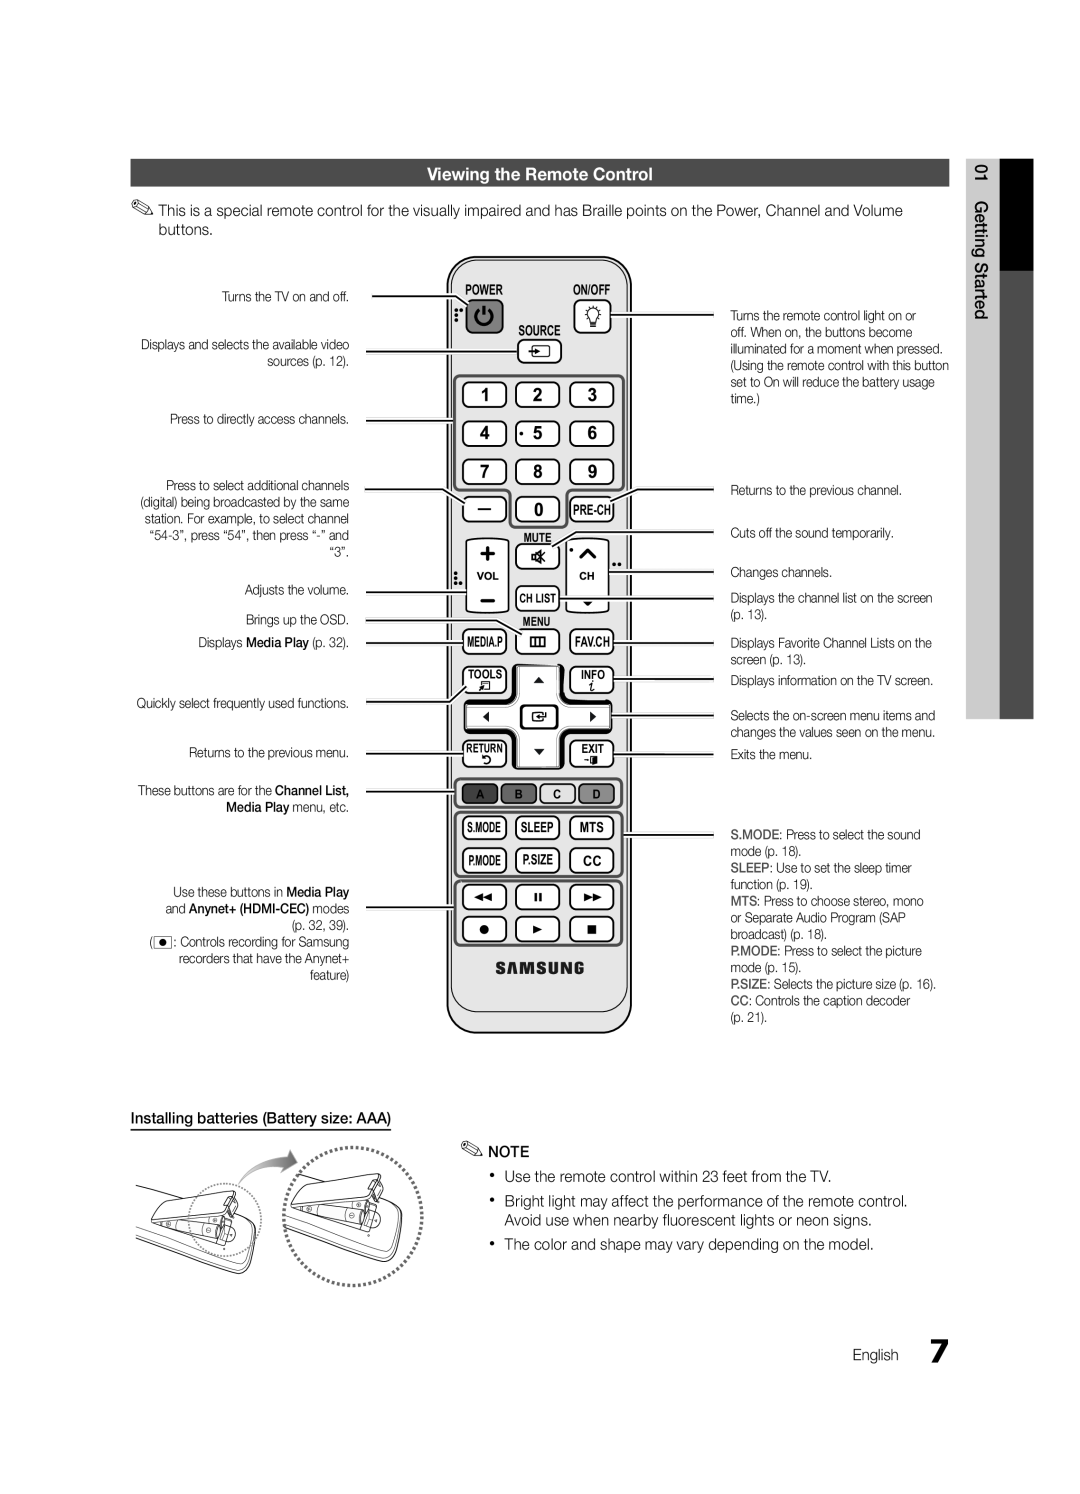 Samsung UC5000-ZC Viewing the Remote Control, Started, Installing batteries Battery size AAA, Power On/Off Source, Pre-Ch 